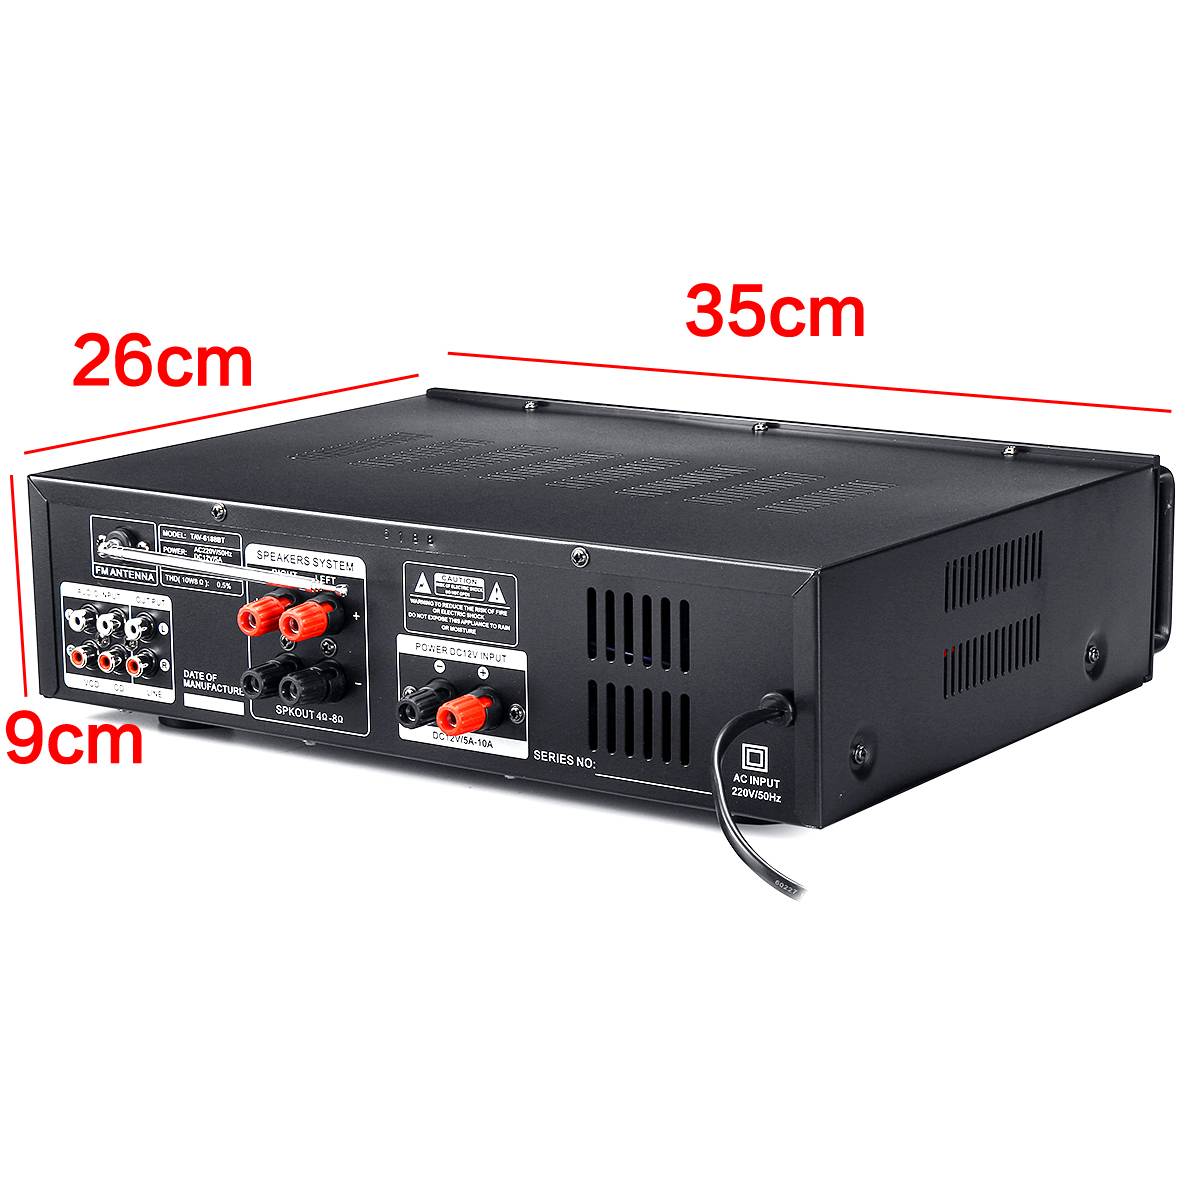 2000W 220V Car Amplifier Audio Power Amplifier bluetooth Stereo Home Theater Amplifier USB SD FM BT Player with Remote Control